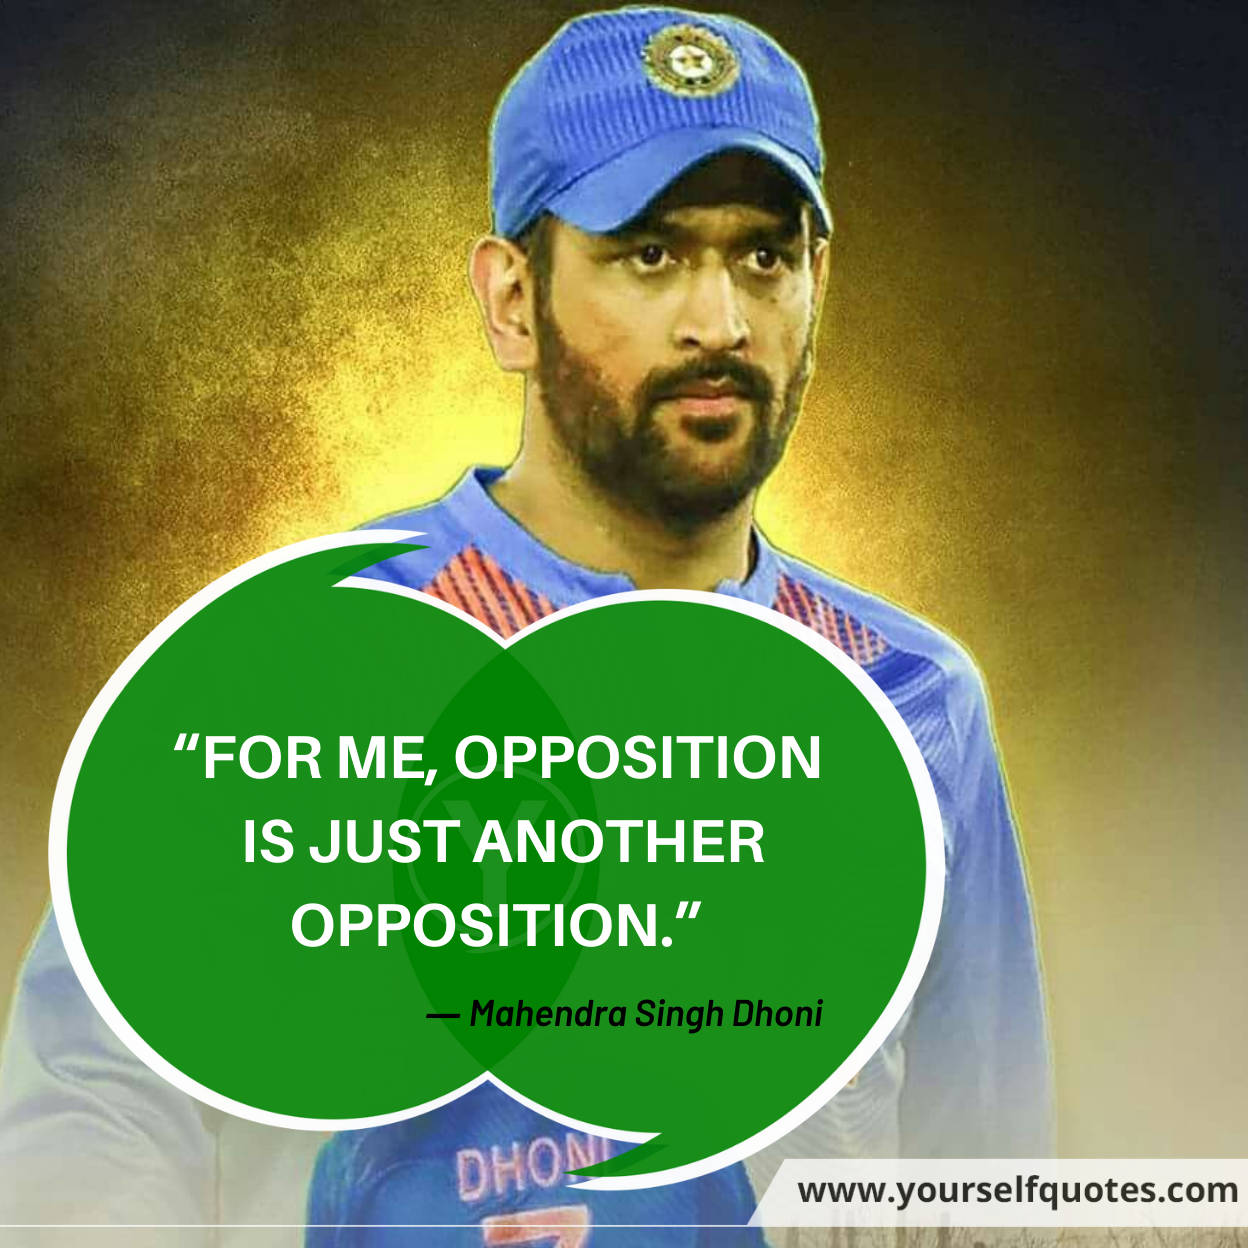 Quotes by Mahendra Singh Dhoni